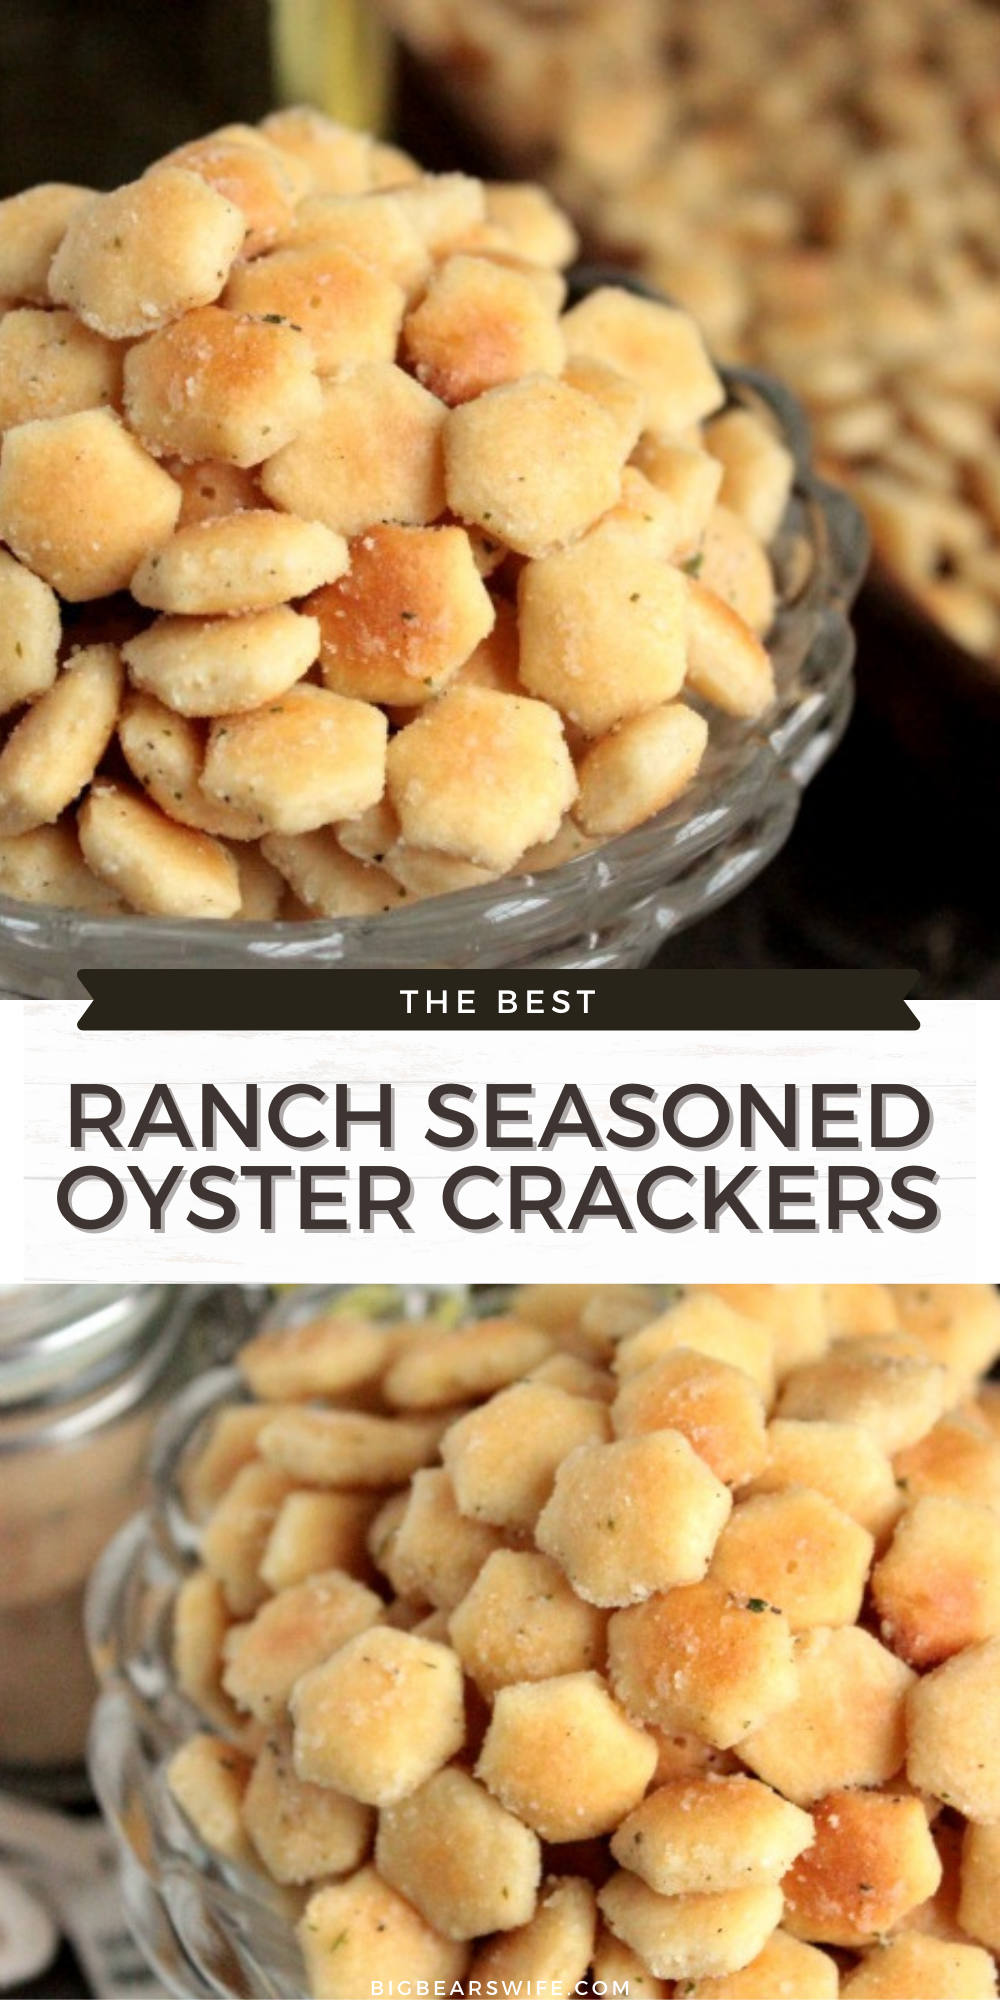 In need of a super simple dish to make for a party or just want to snack on a fun vintage recipe? These Ranch Seasoned Oyster Crackers are just what you need! Made with oyster crackers, ranch seasoning and a few more ingredients, these little crackers are delicious and super easy to make!  via @bigbearswife